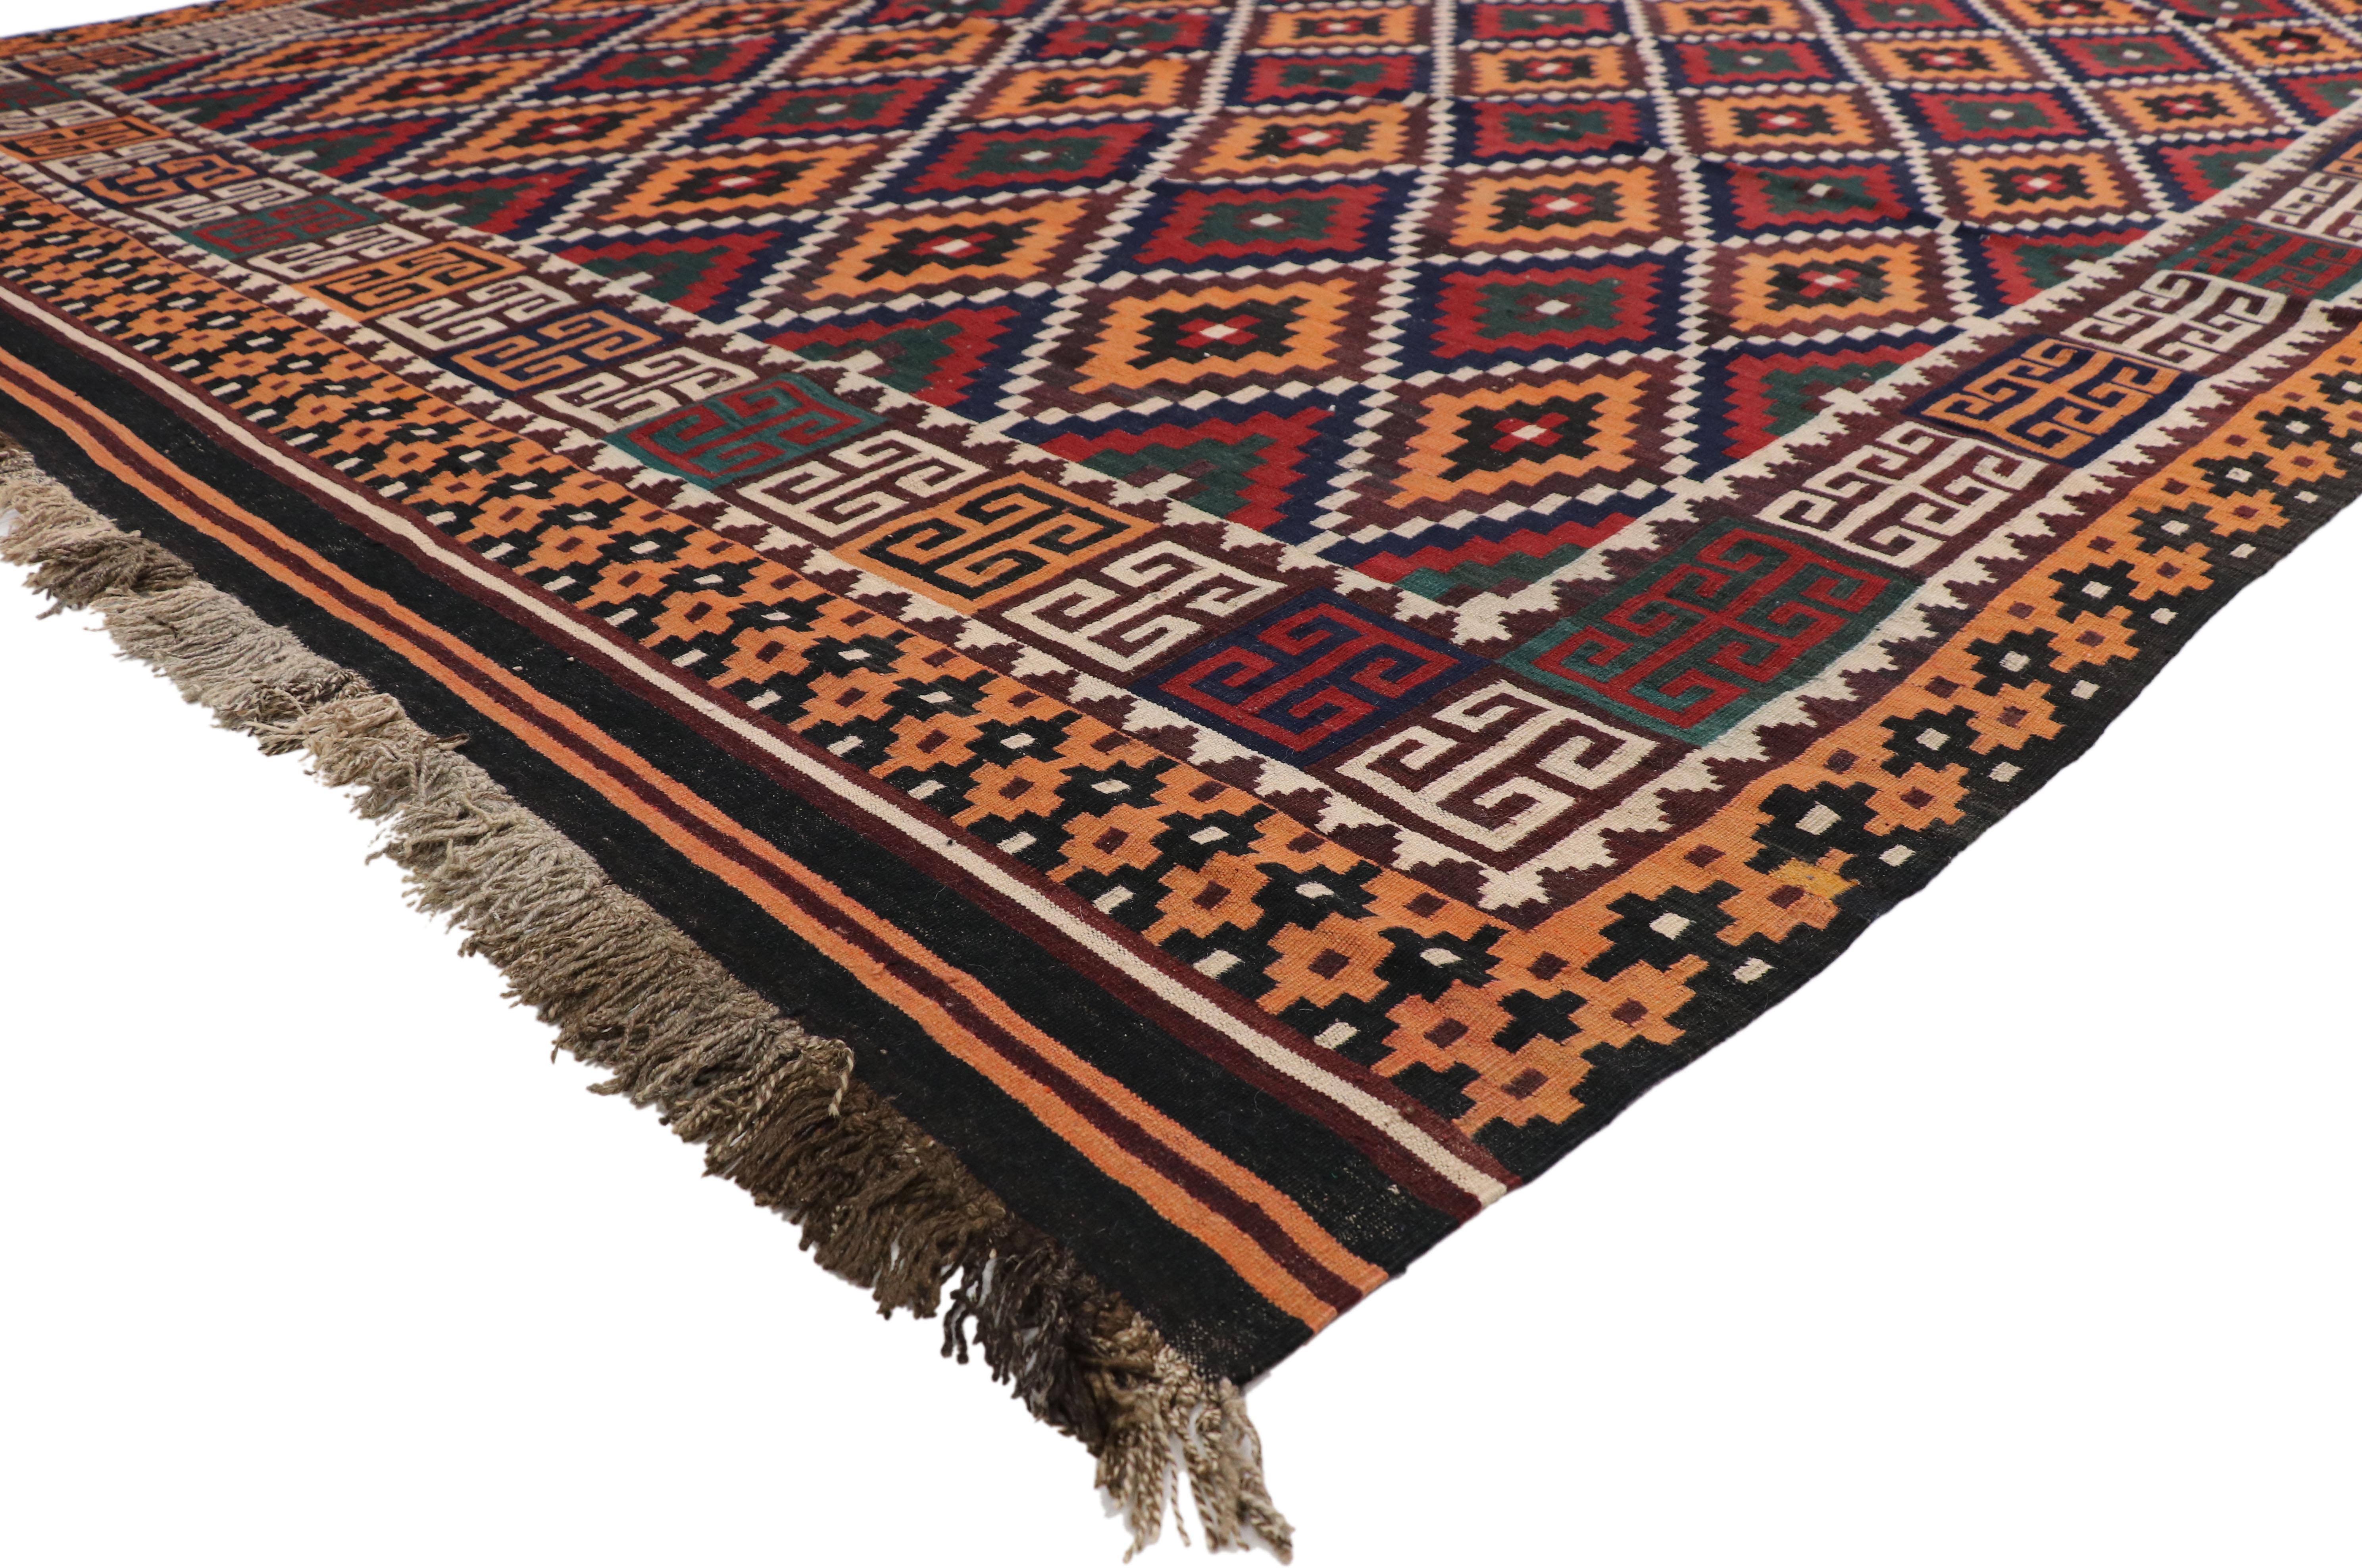 74277, vintage Afghan Ghalmouri Maimana Kilim rug with Nomadic tribal style. Highlighting nomadic charm and nomadic tribal vibes, this handwoven wool vintage Afghan Ghalmouri Maimana Kilim rug beautifully showcases Mid-Century Modern style. It